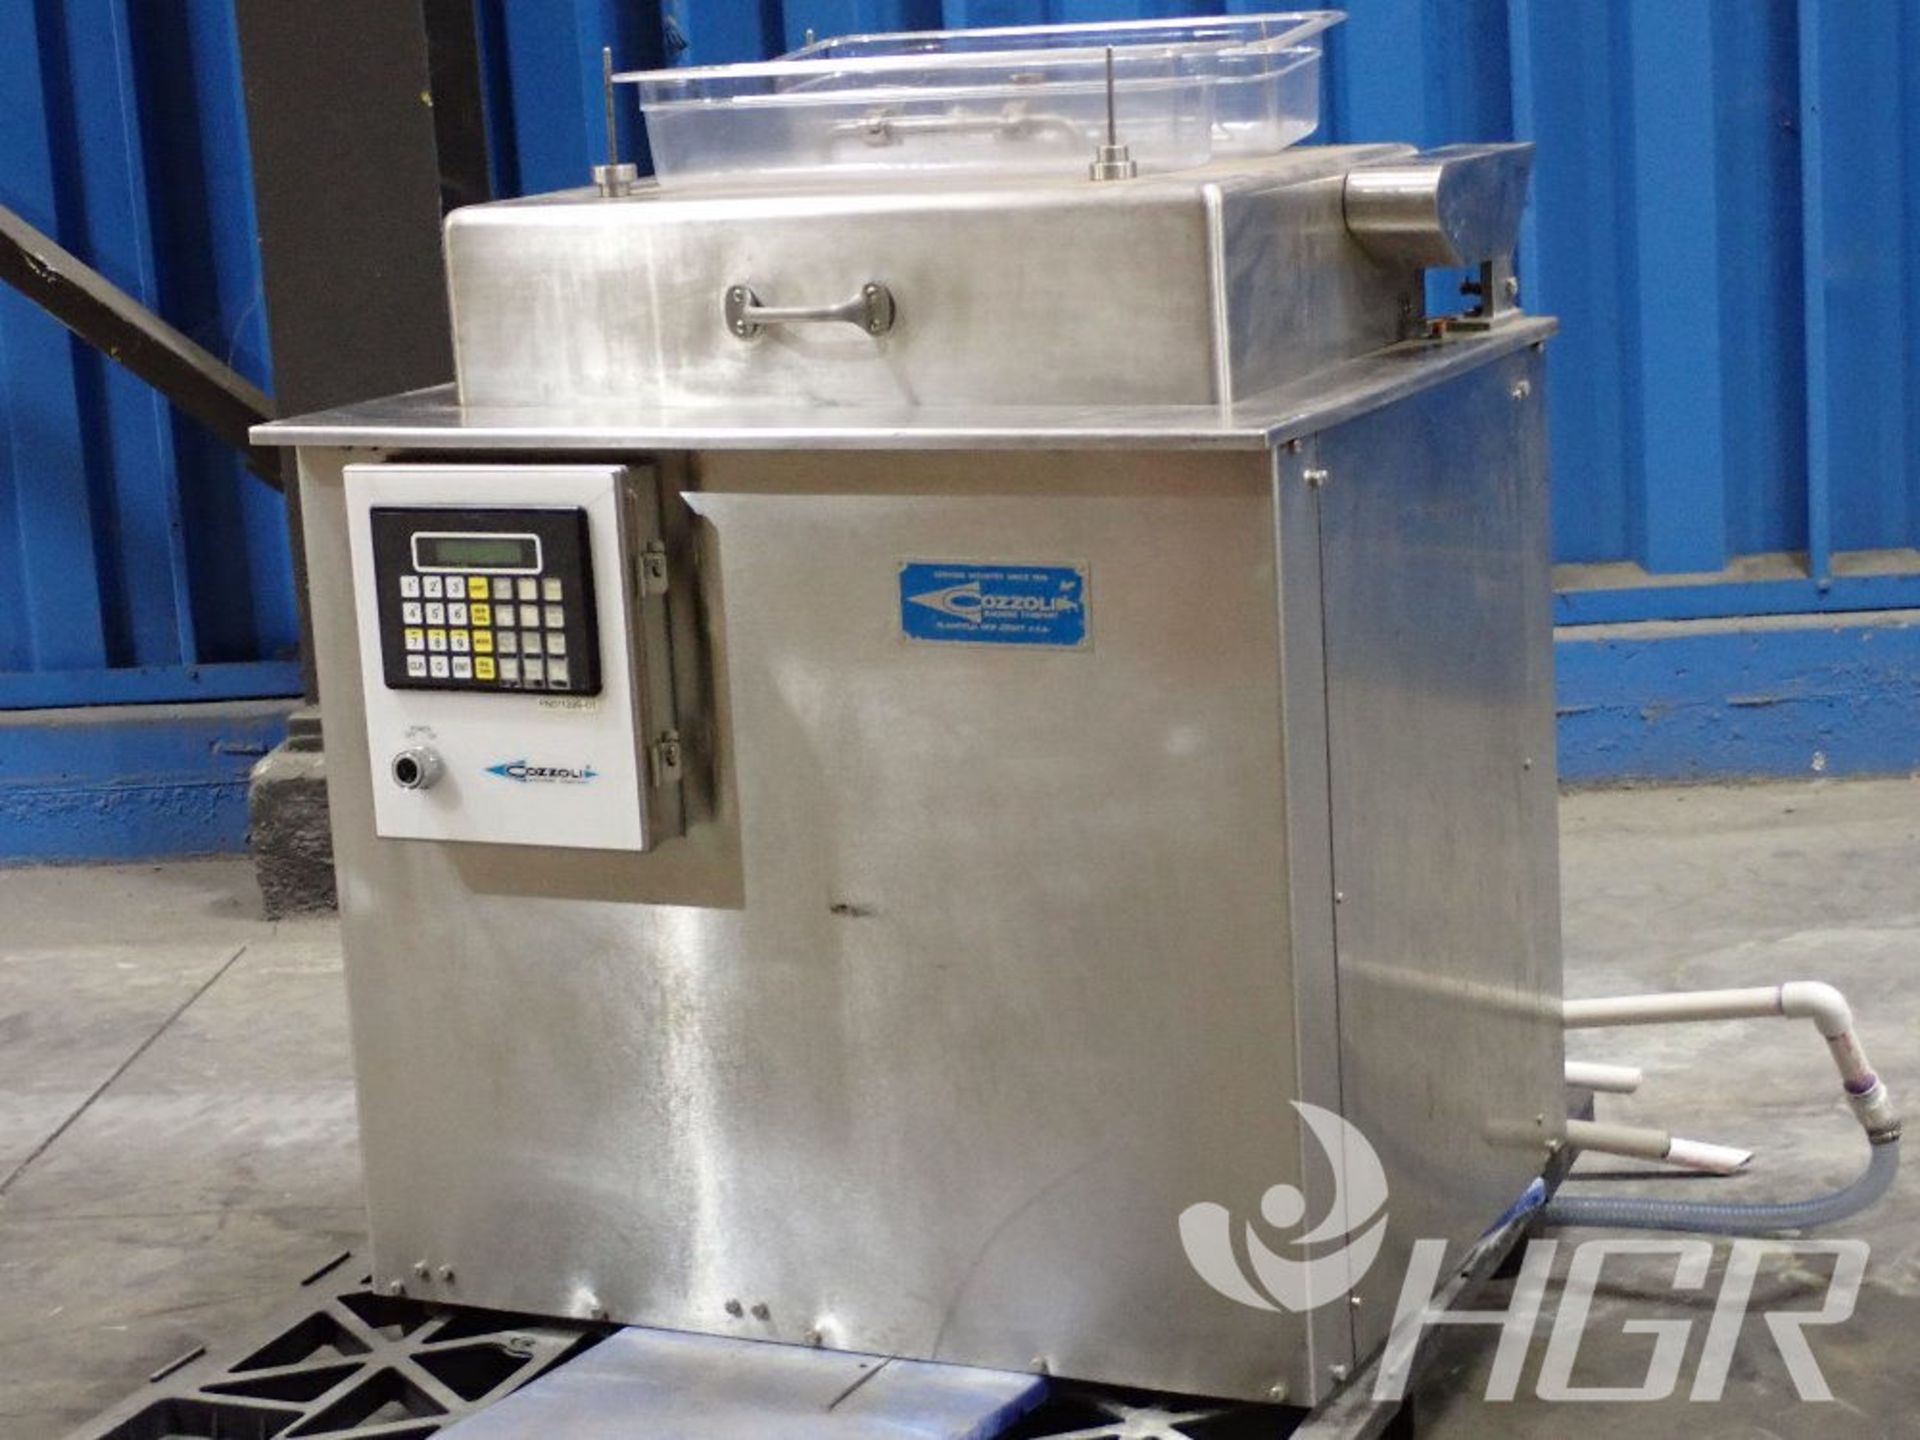 COZZOLI CLEANING STATION, Model n/a, Date: n/a; s/n GW24-242, Approx. Capacity: 21X15, Power: n/a,